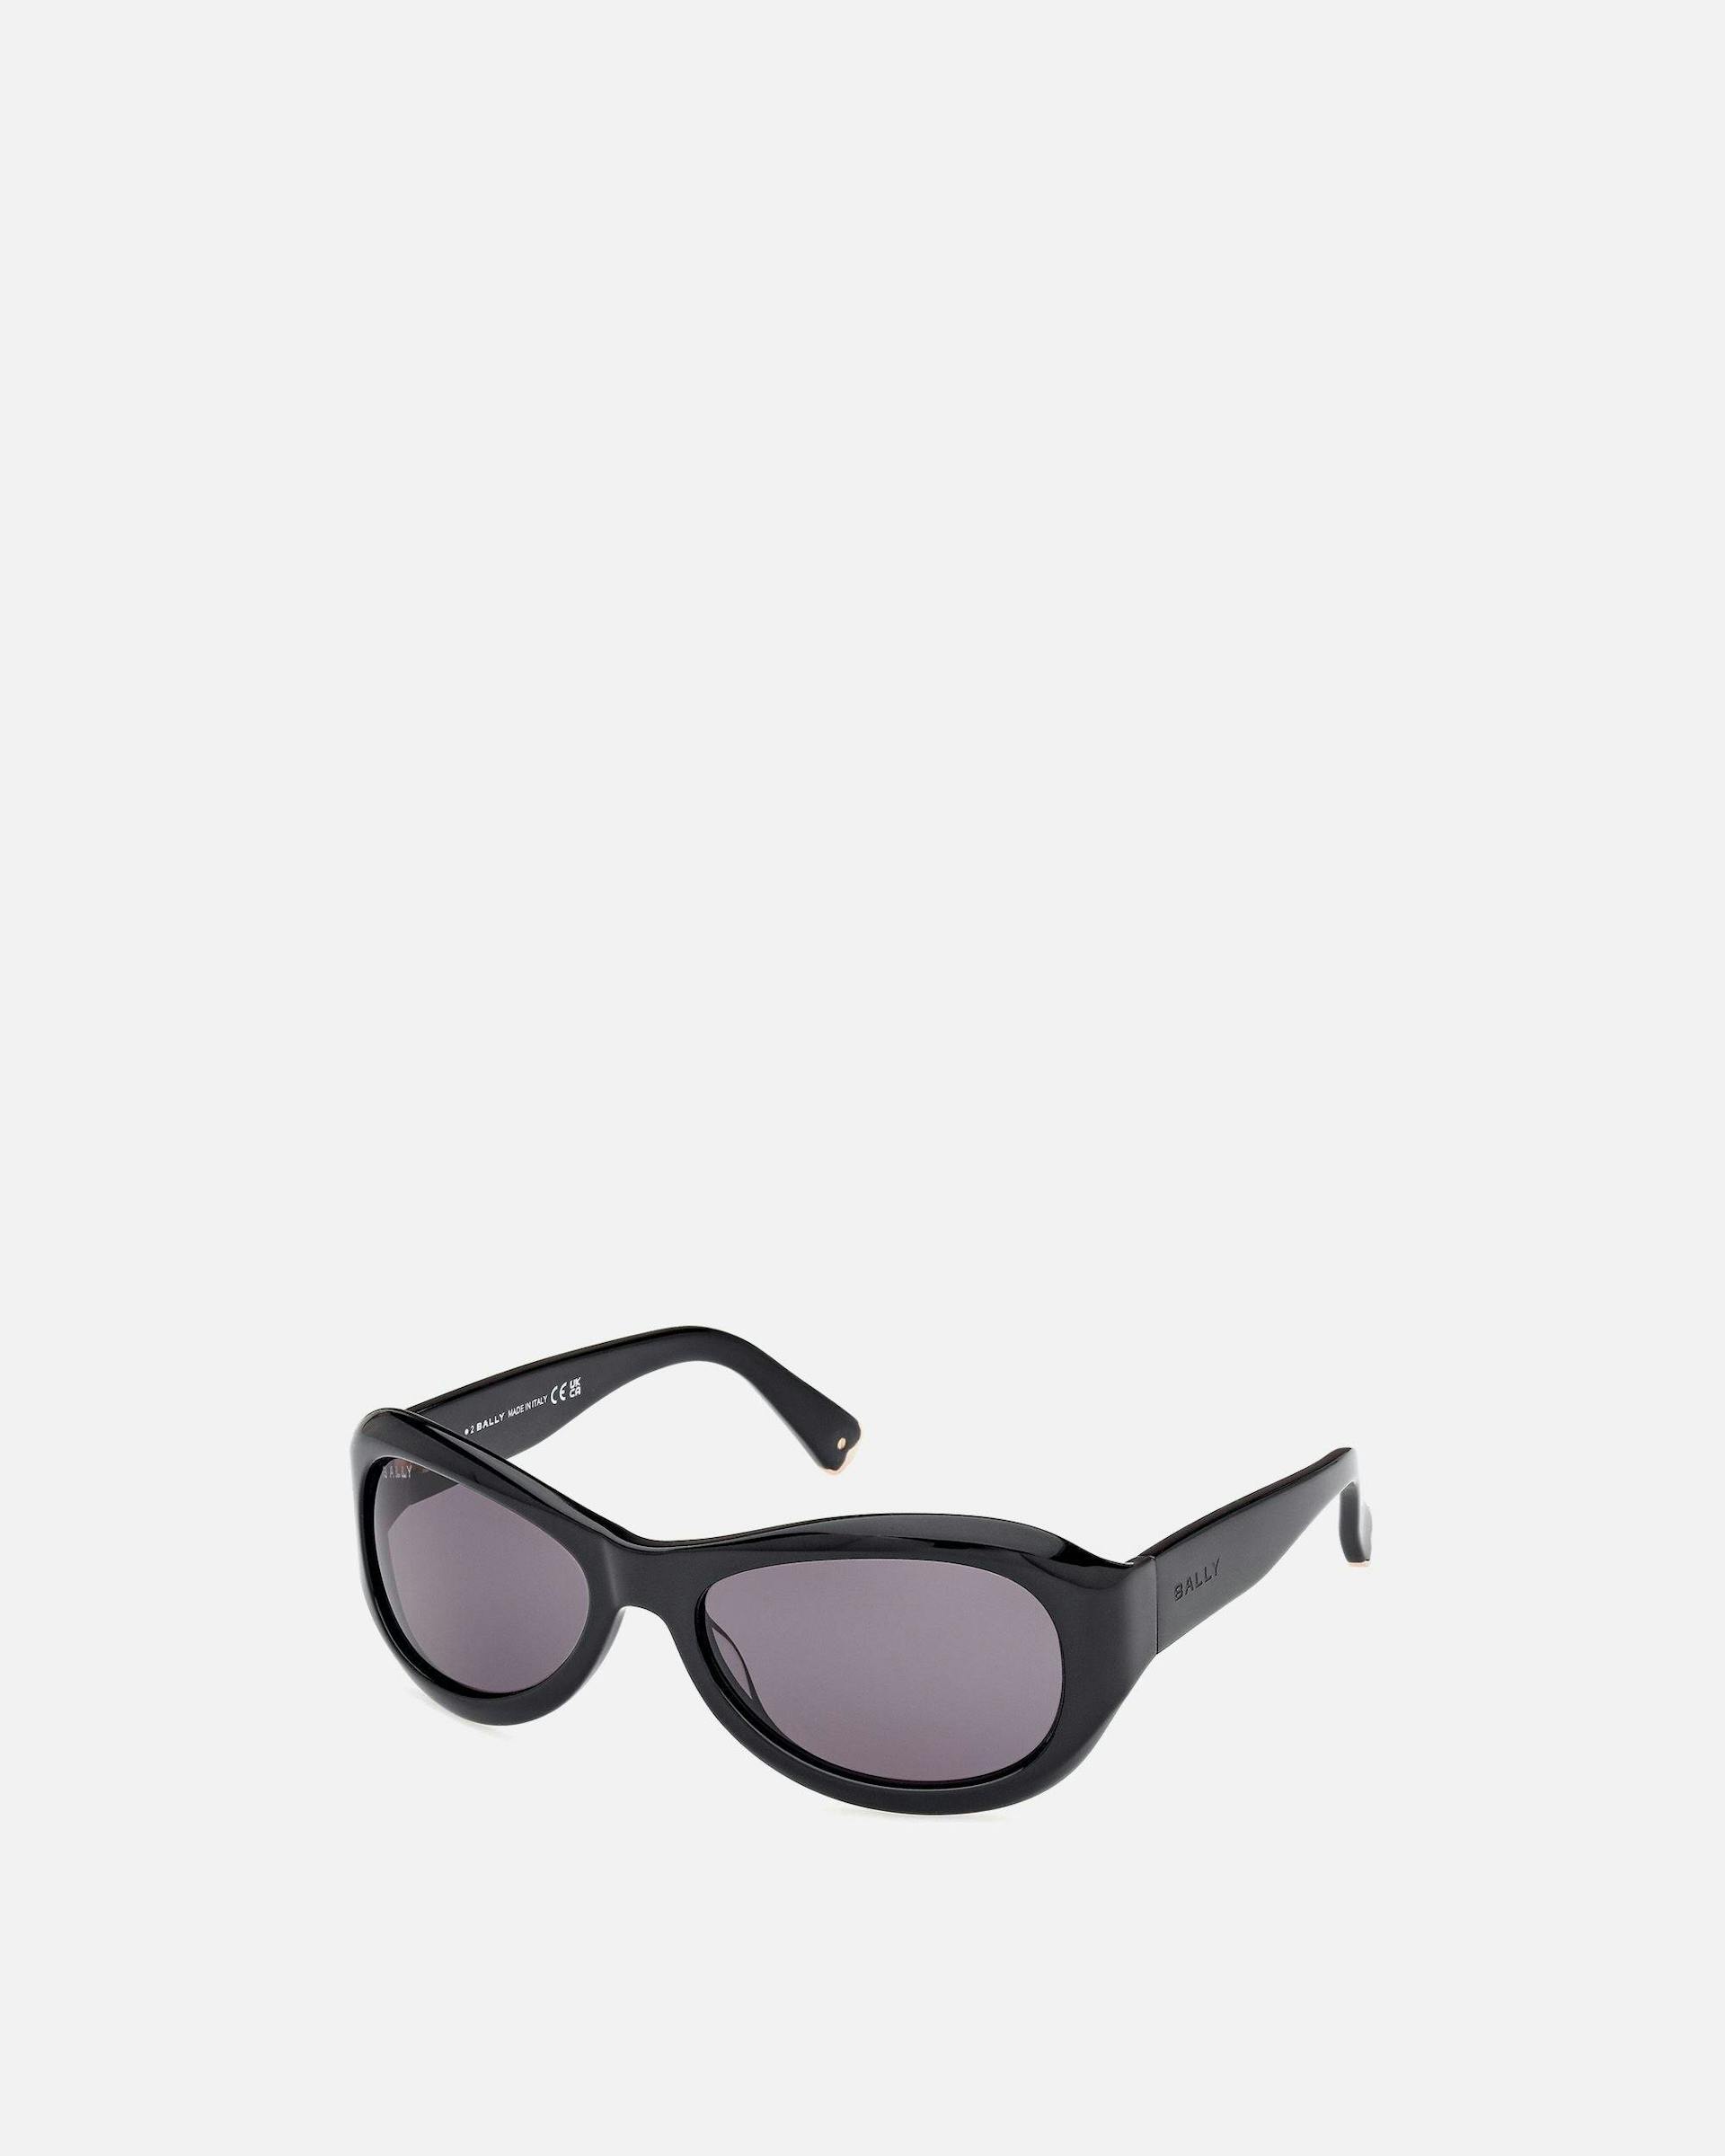 Maurice Acetate Sunglasses in Black and Smoke | Bally | Still Life 3/4 Side